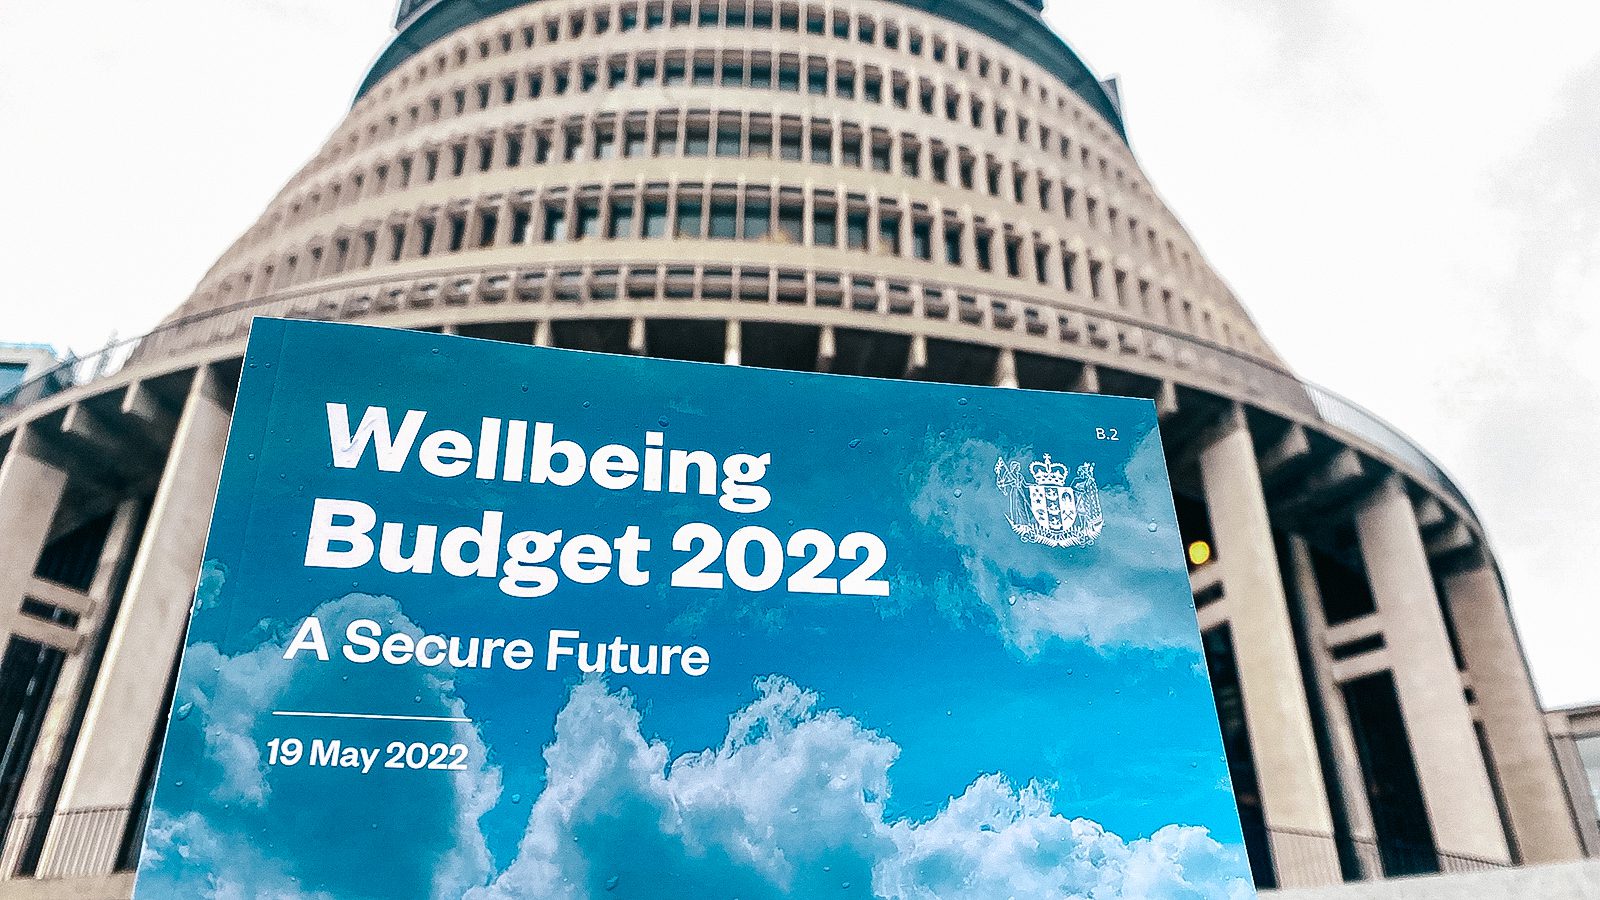 Visionwest's response to Budget 2022.